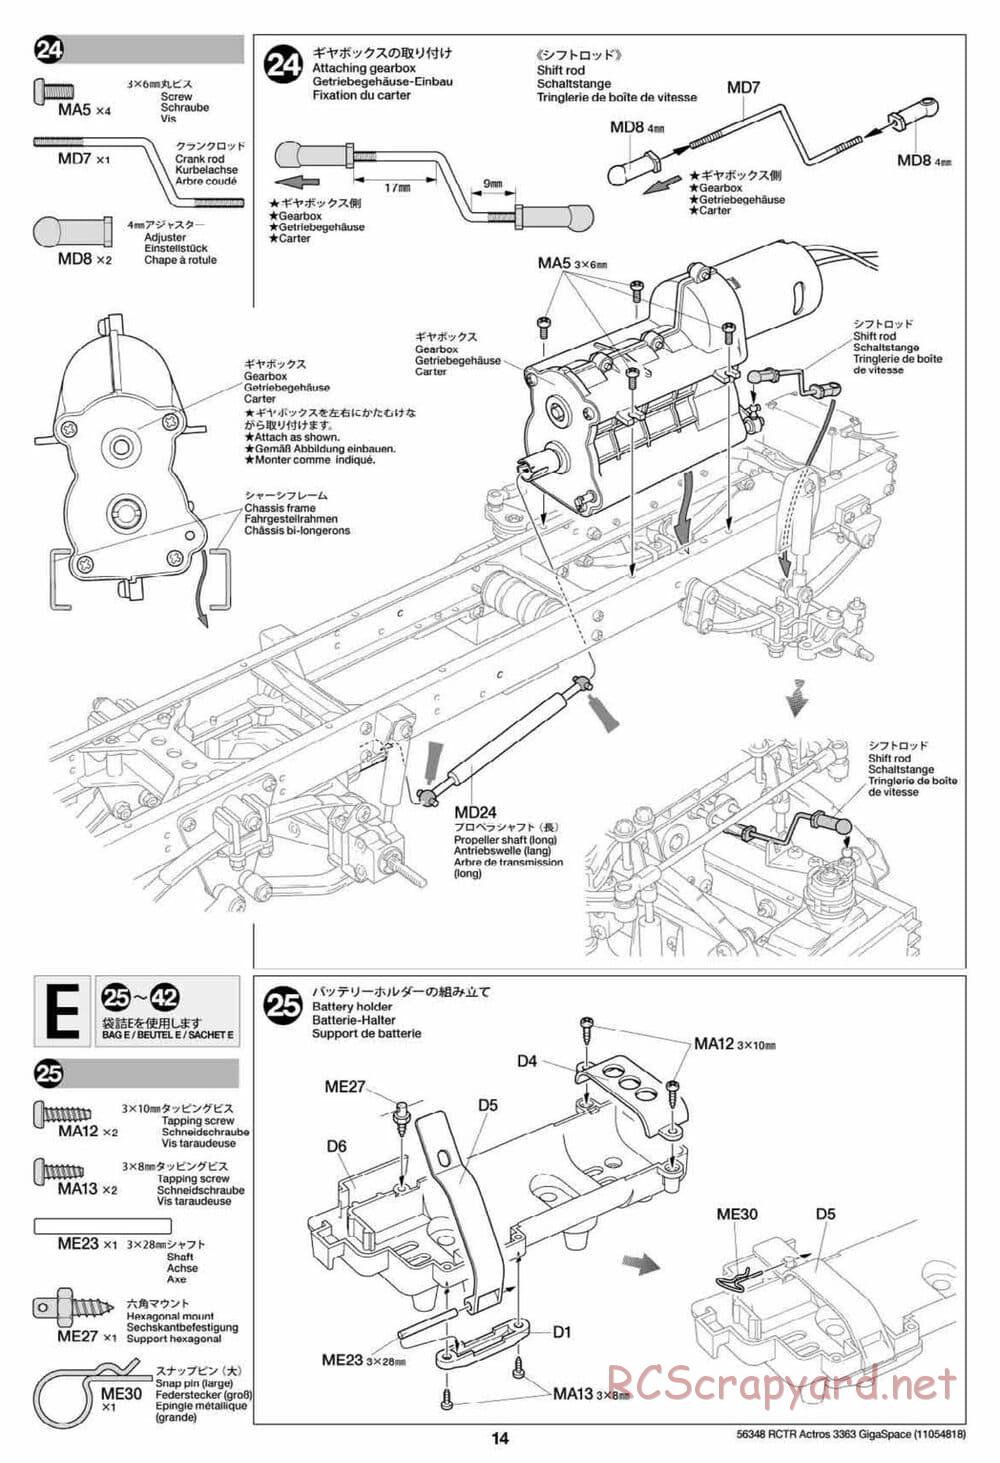 Tamiya - Mercedes-Benz Actros 3363 6x4 GigaSpace Tractor Truck Chassis - Manual - Page 14